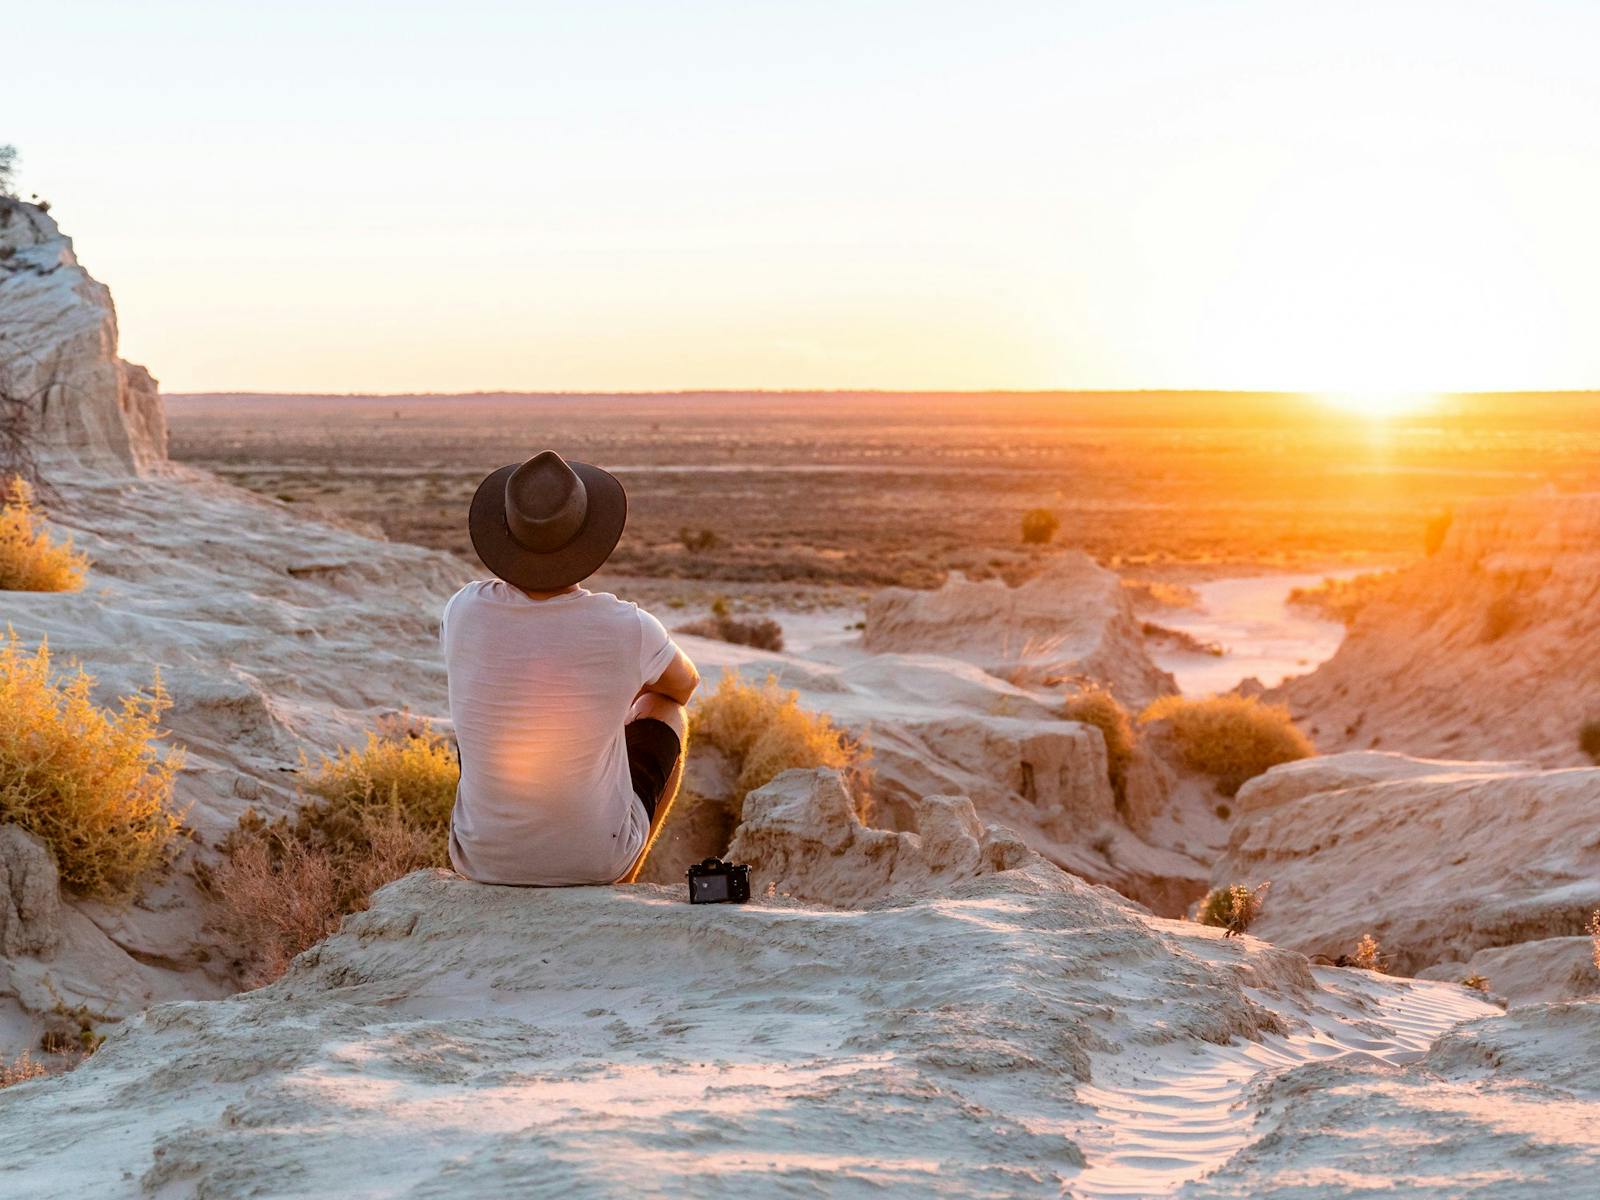 Watching sunset at the Walls of China in Mungo National Park